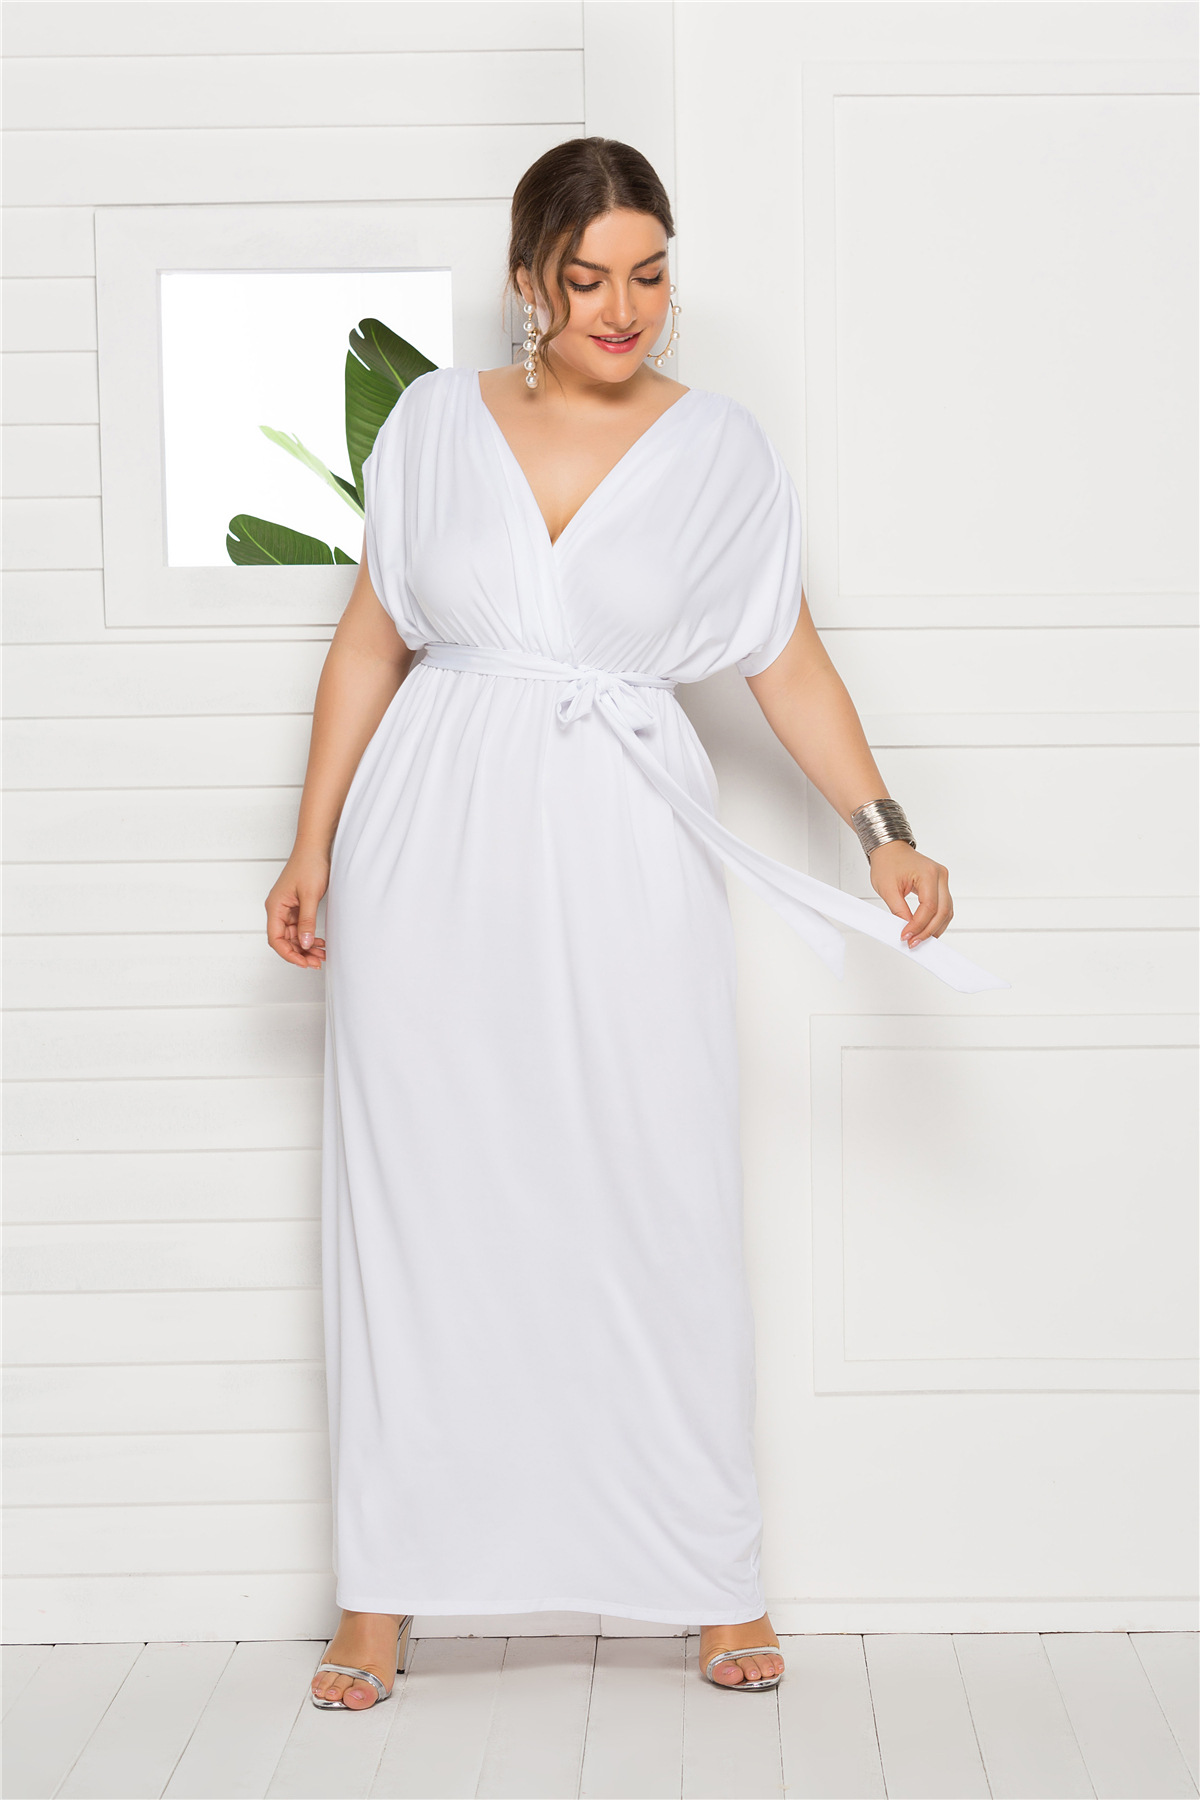 plus size white formal party dresses